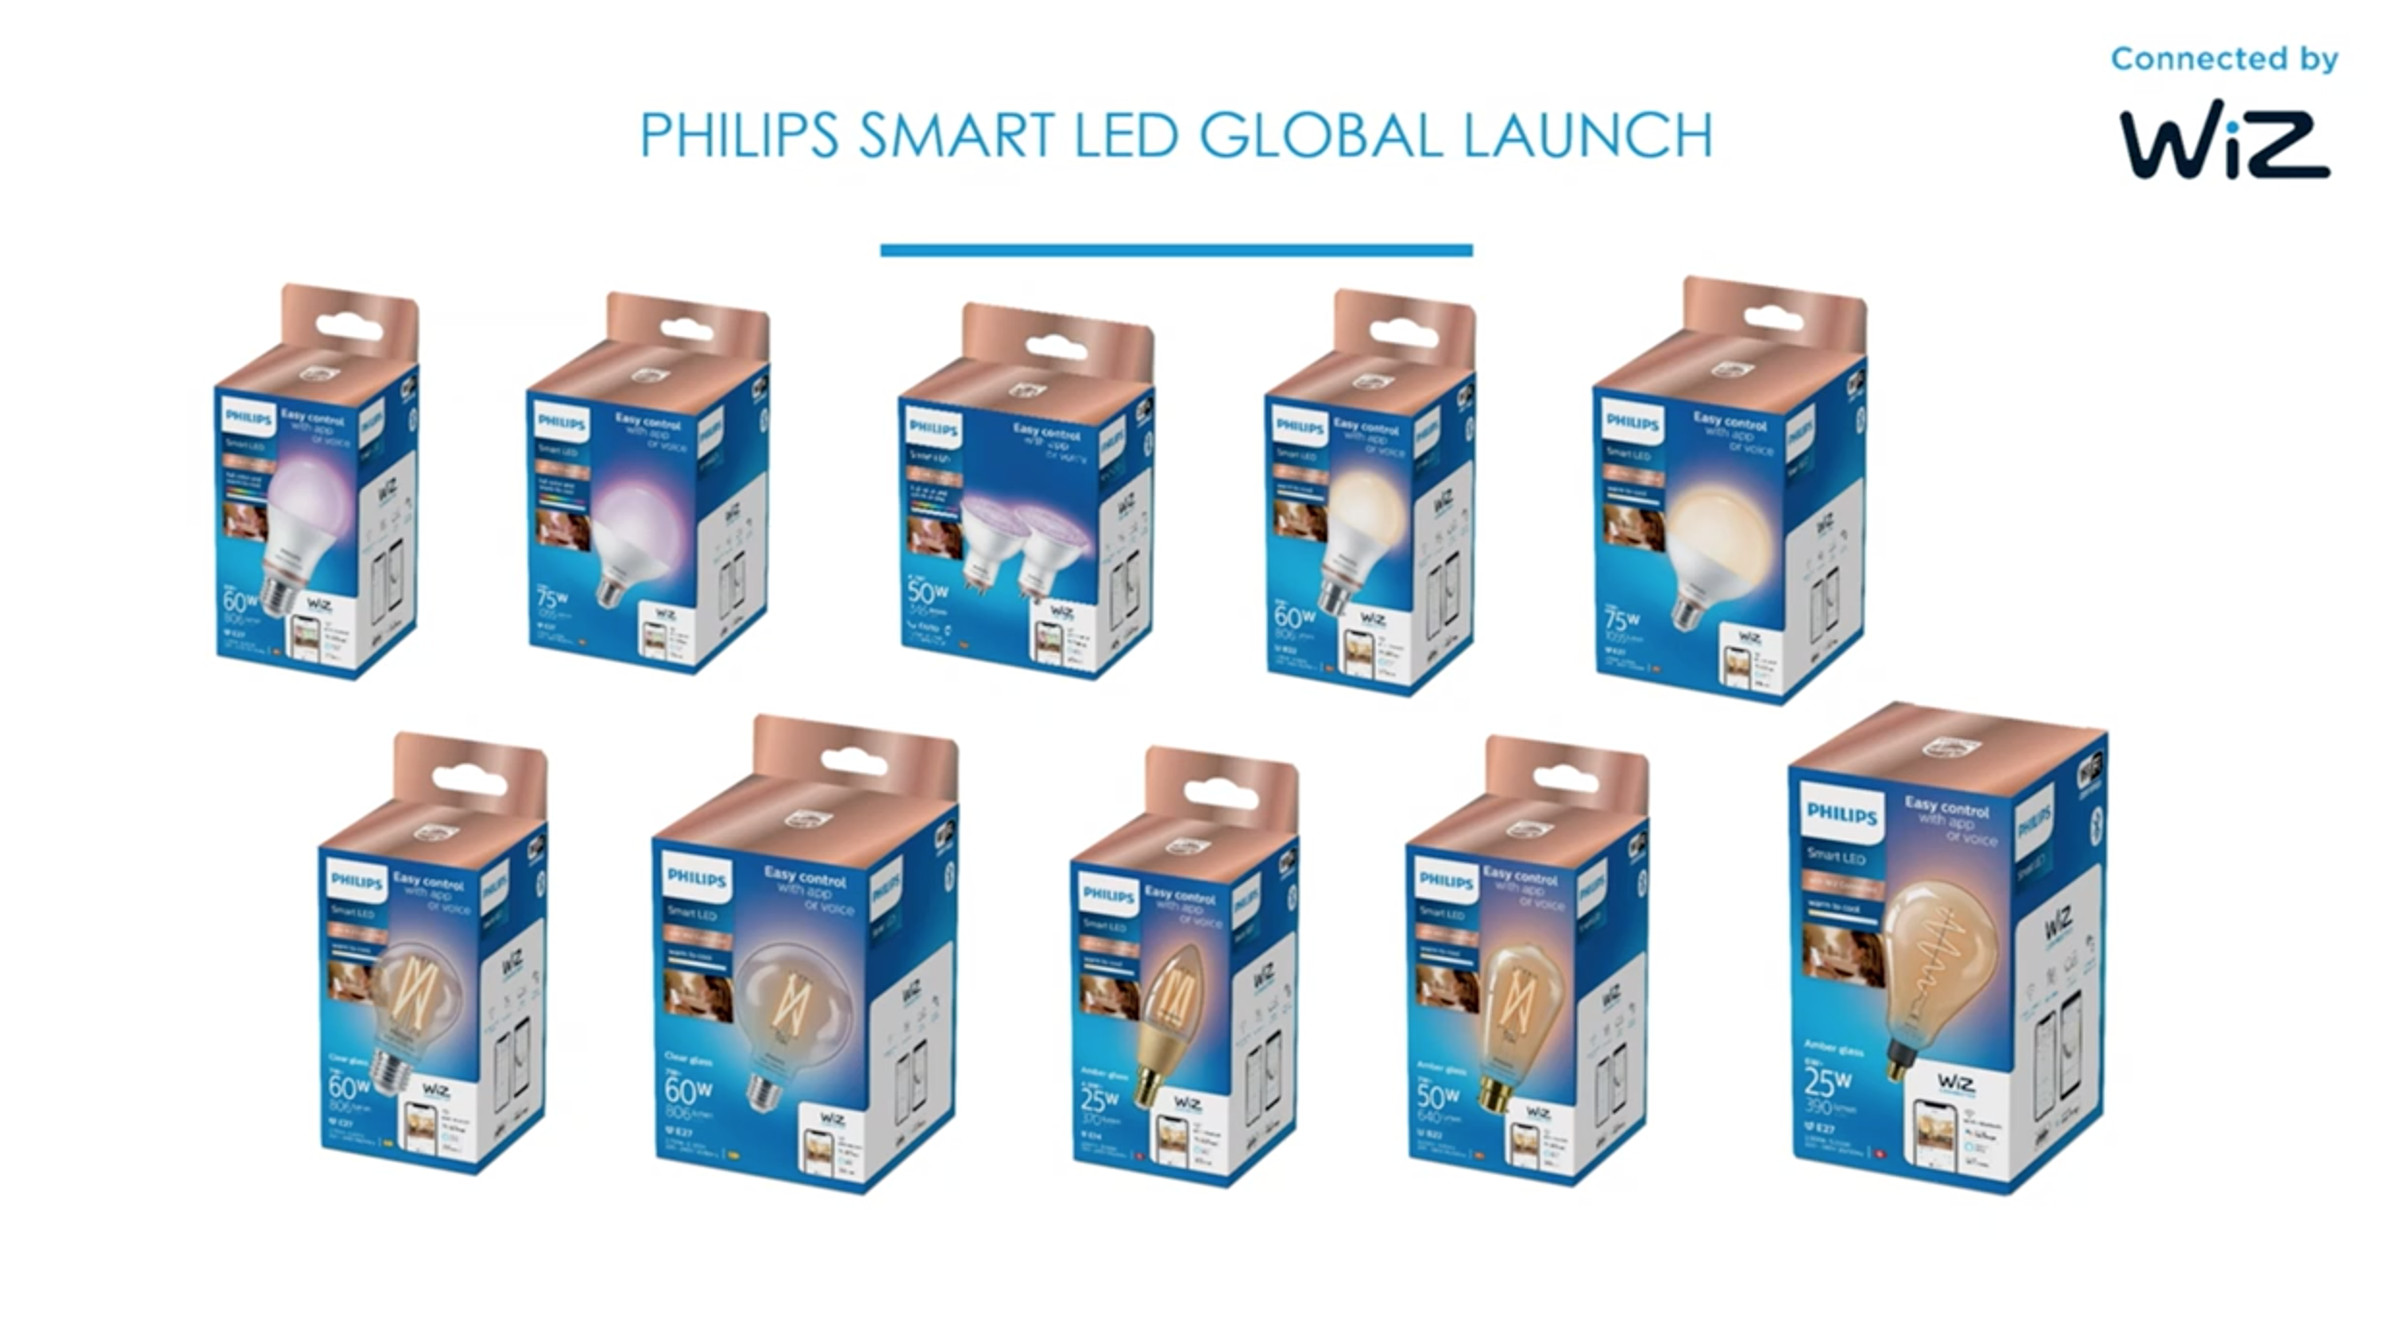 Some of the many new Philips Smart LED bulbs now available.